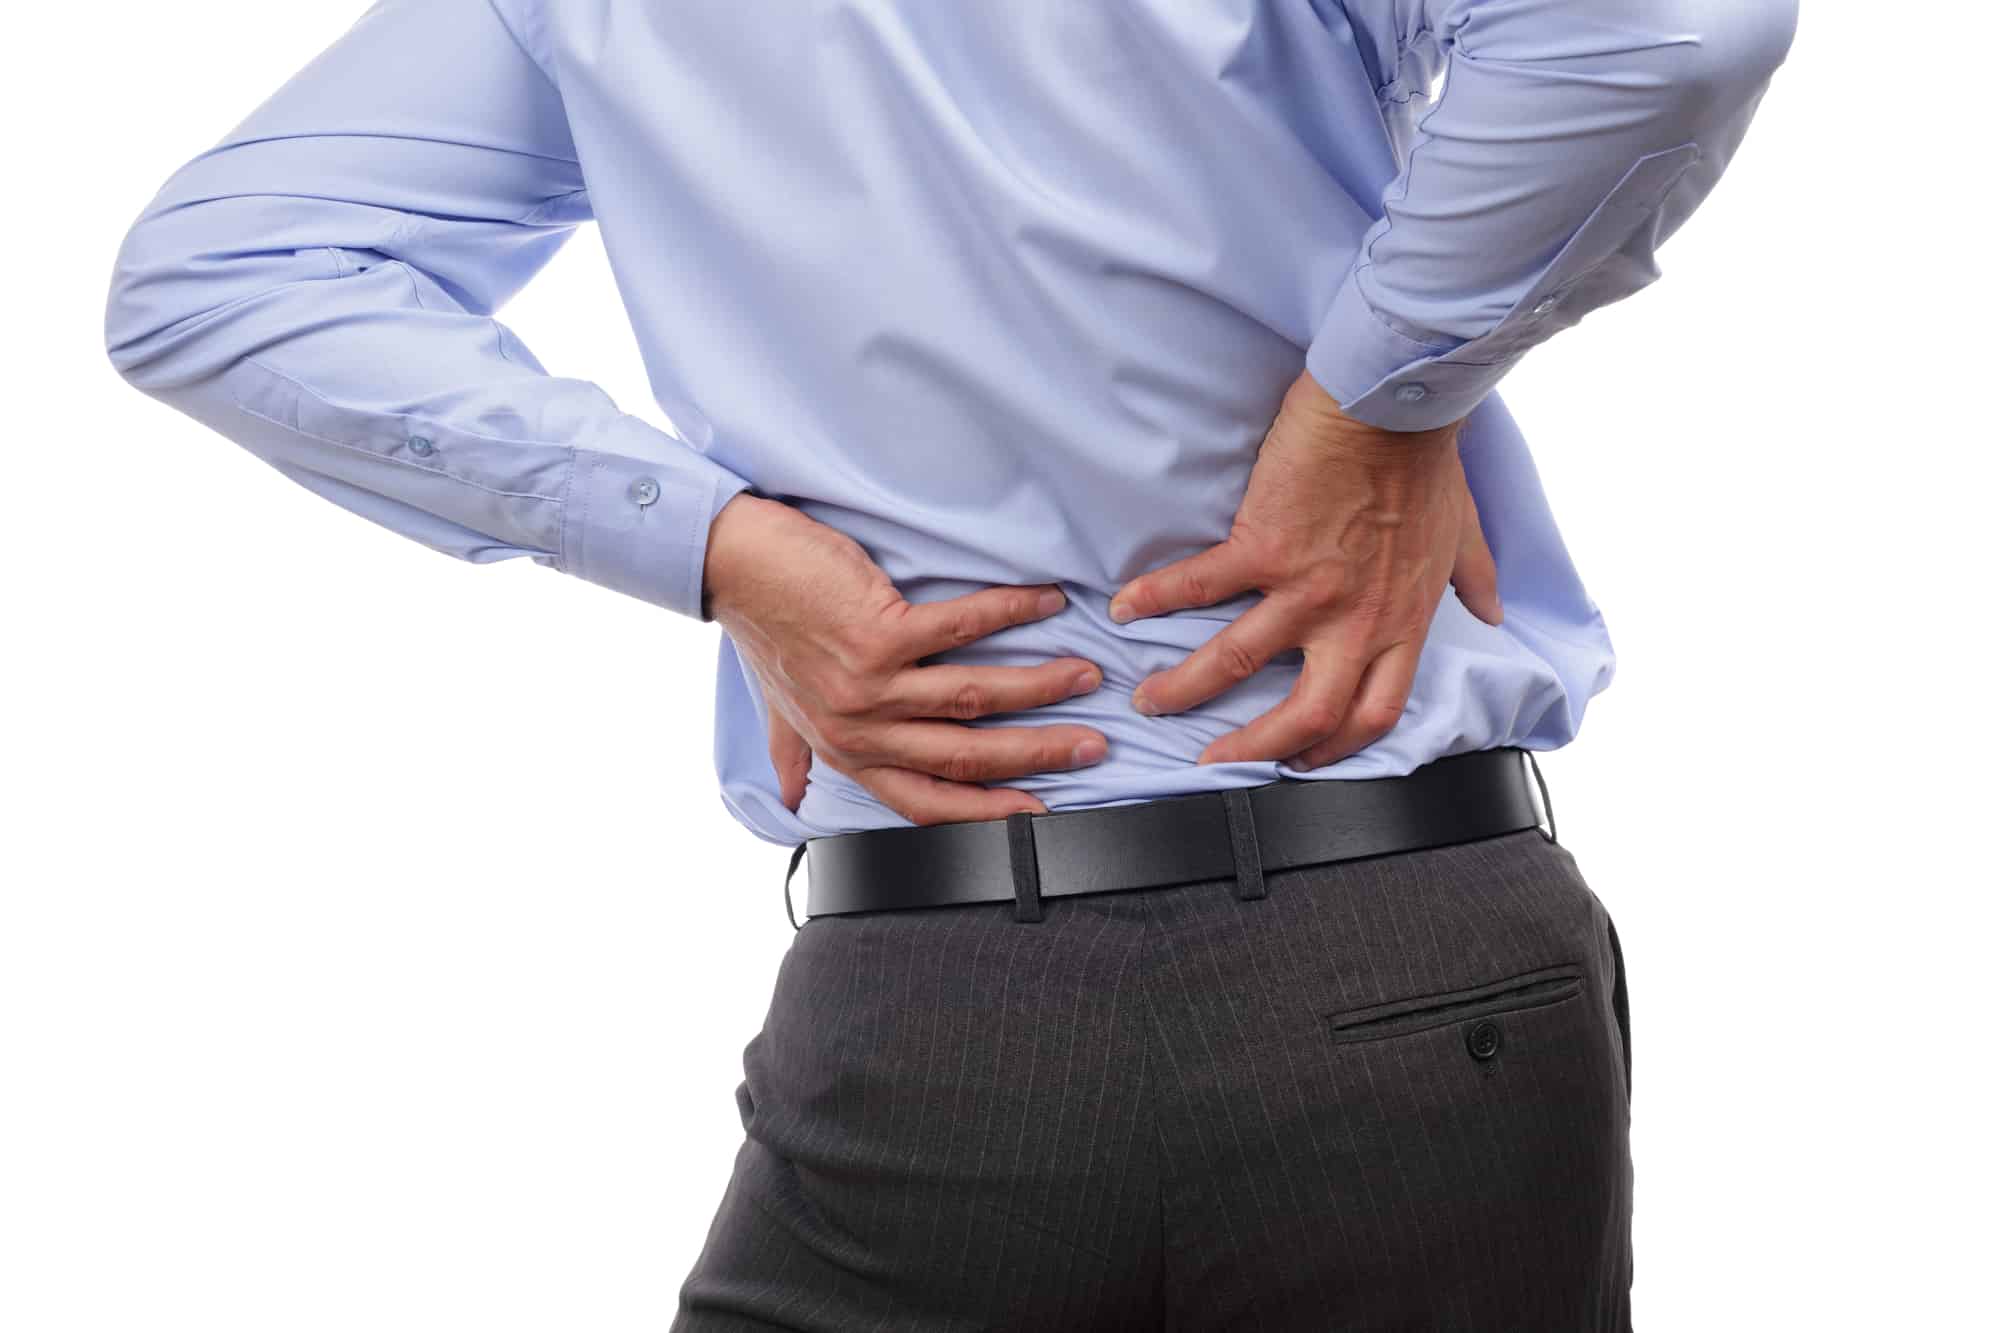 lower back pain caused by poor posture